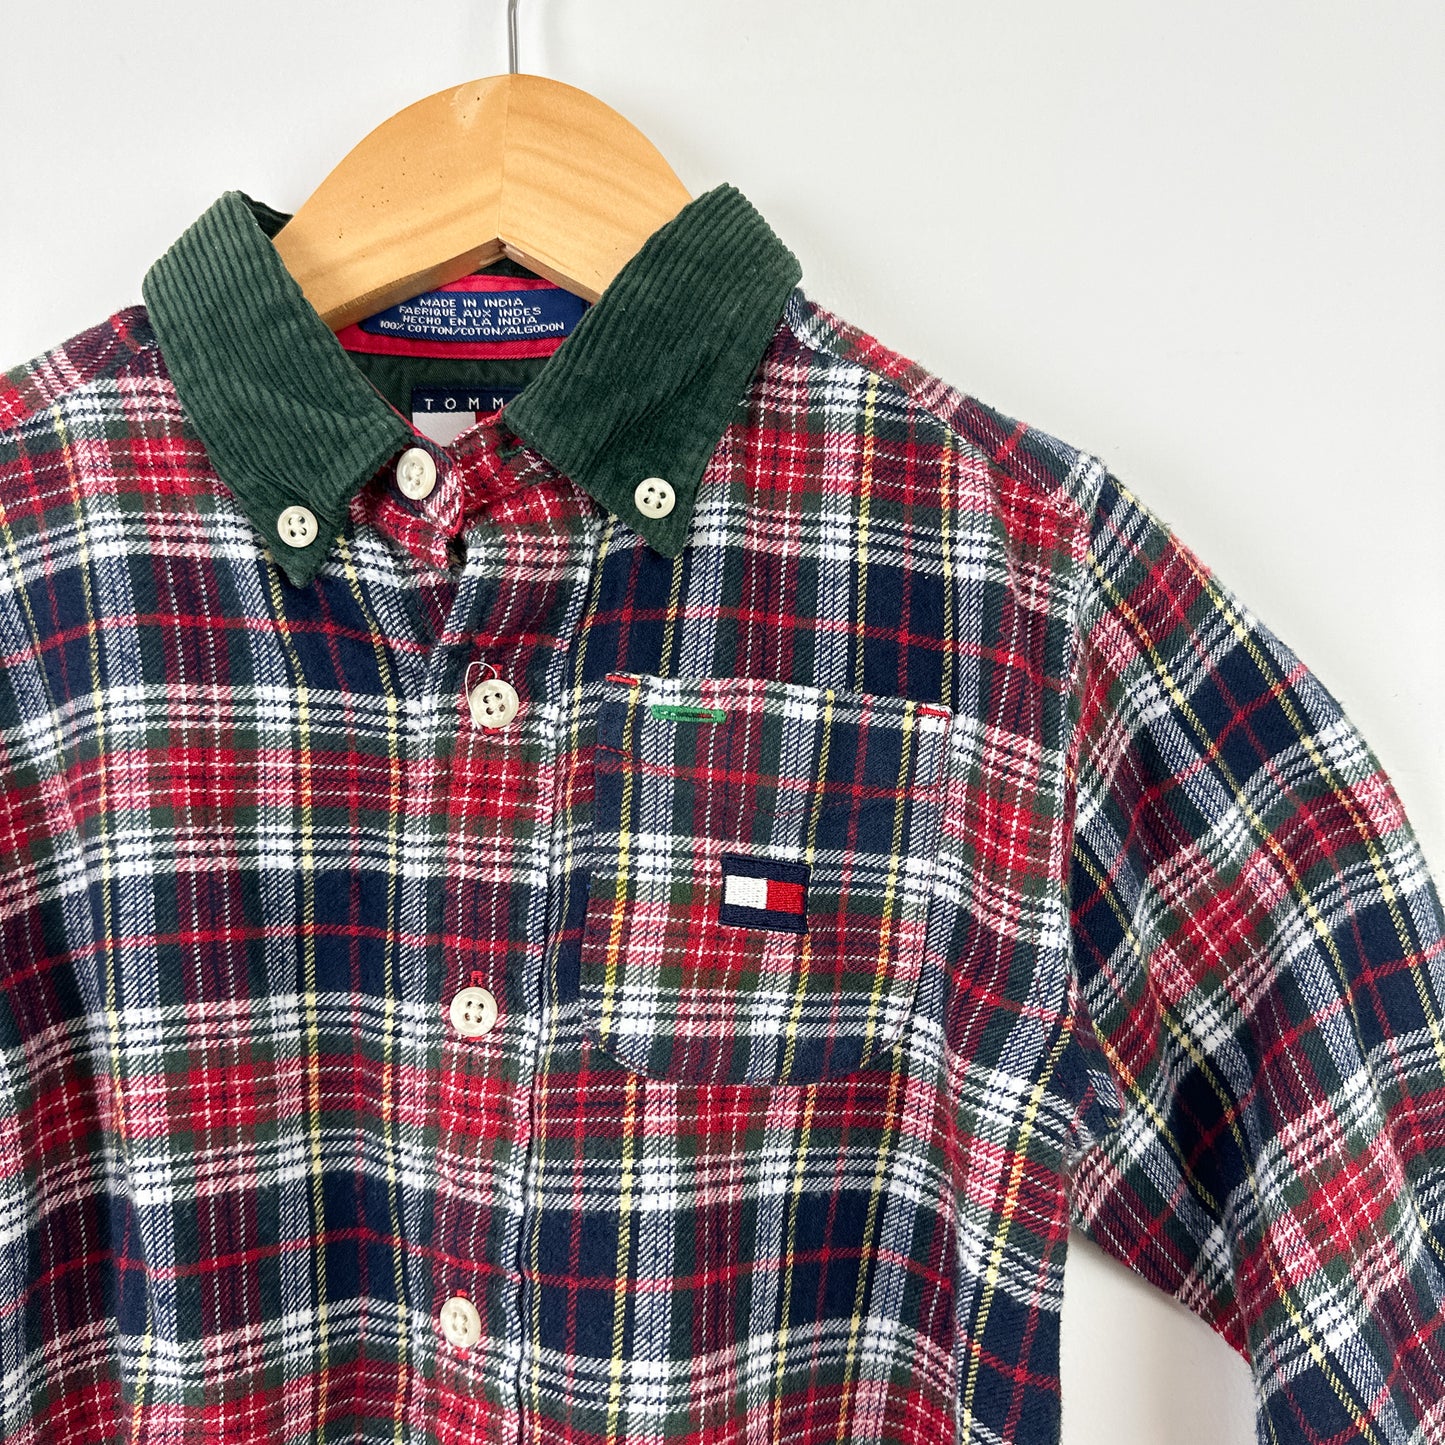 Vintage Tommy Hilfiger Flannel with Cord Collar - Size 12mo